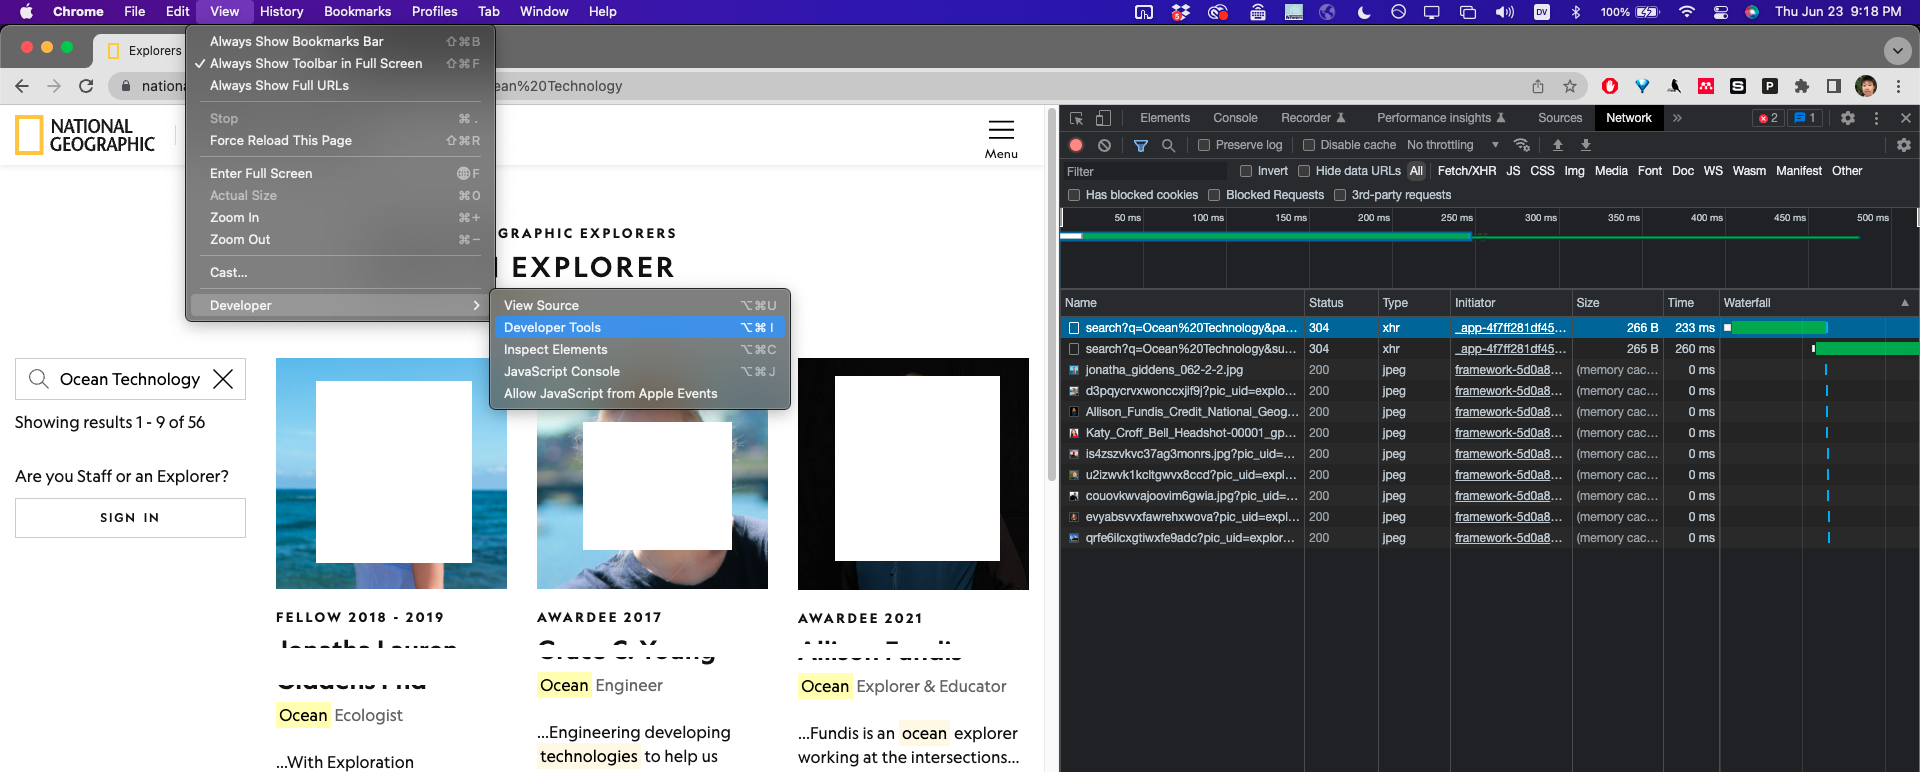 Screenshot showing the "network" view in Google Chrome's developer tools